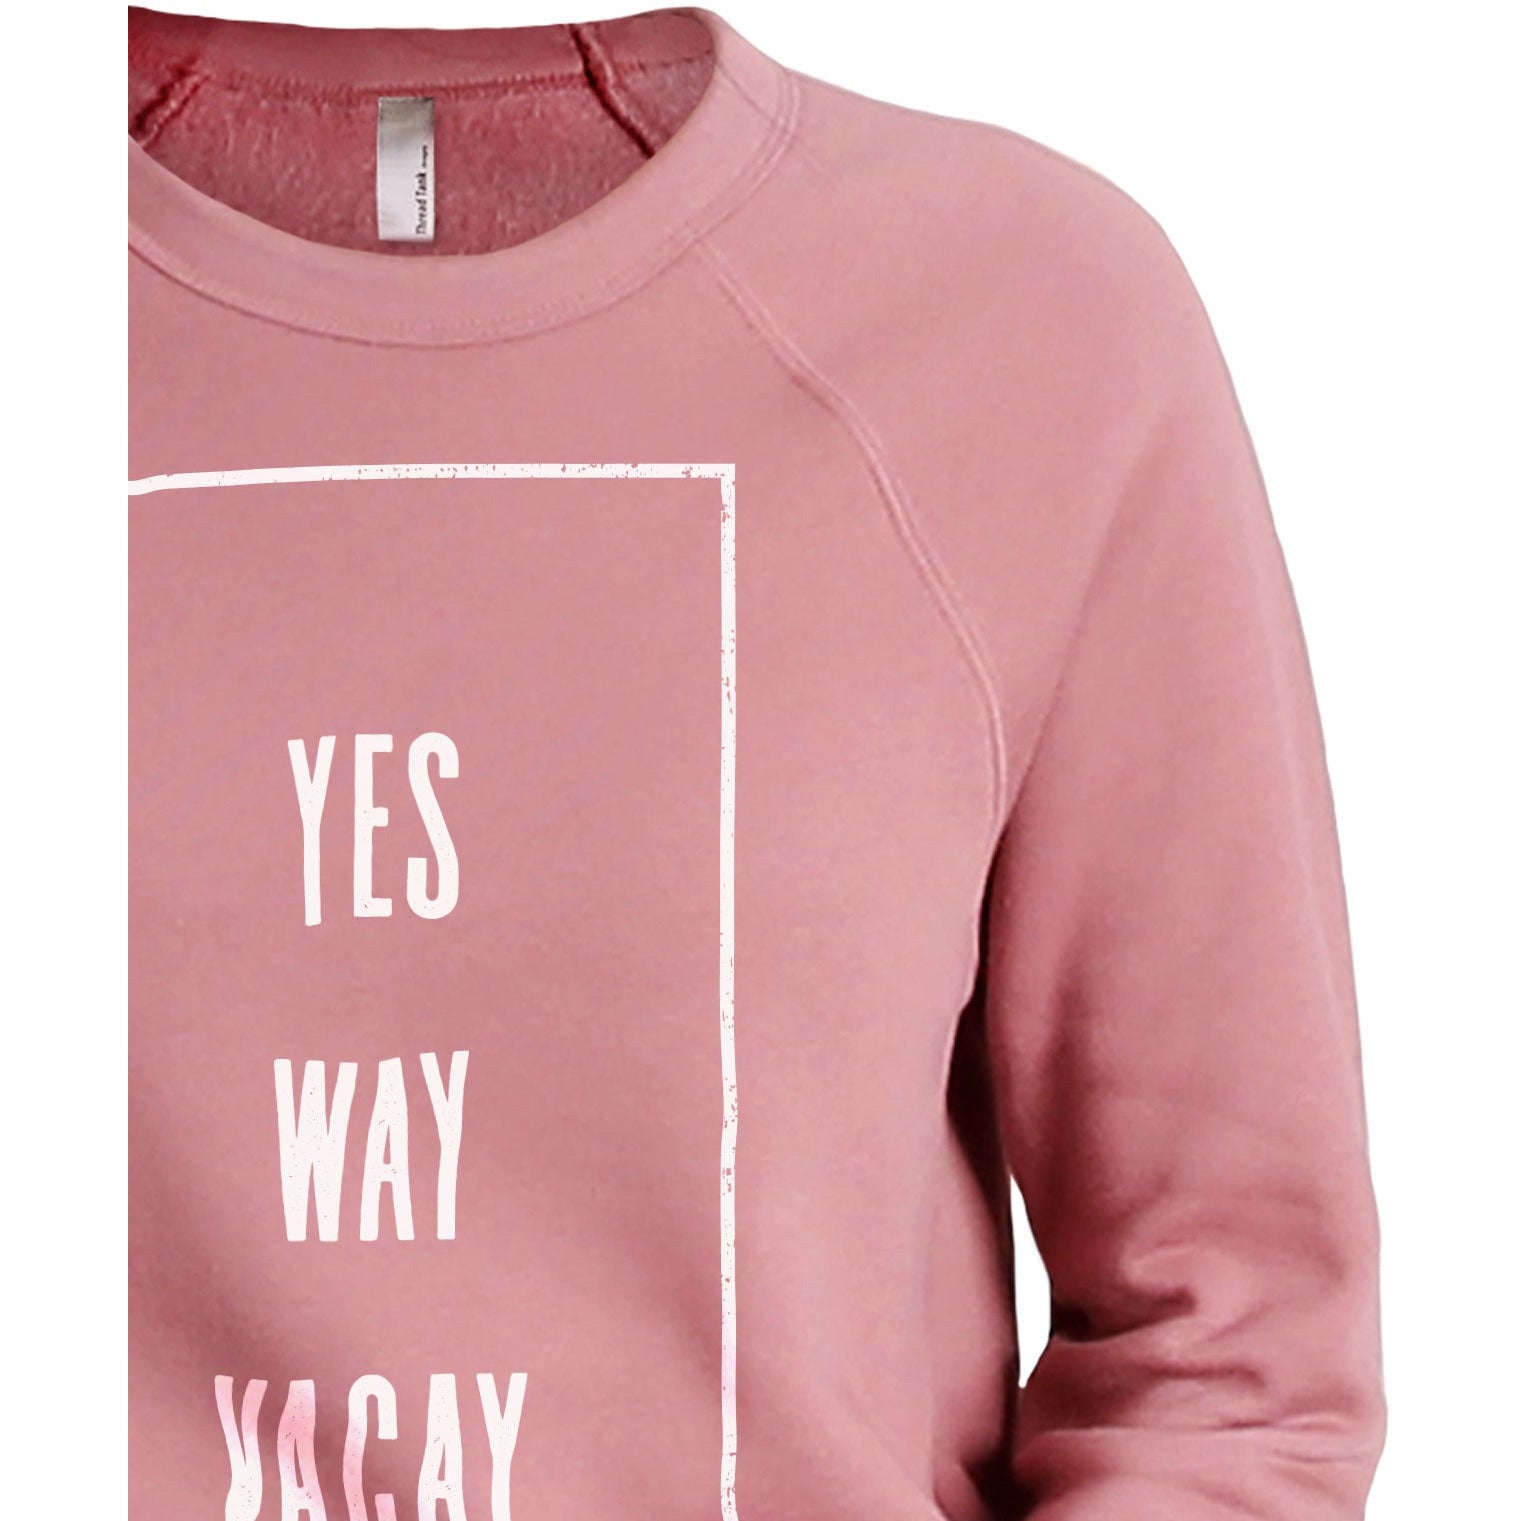 Yes Way Vacay - Stories You Can Wear